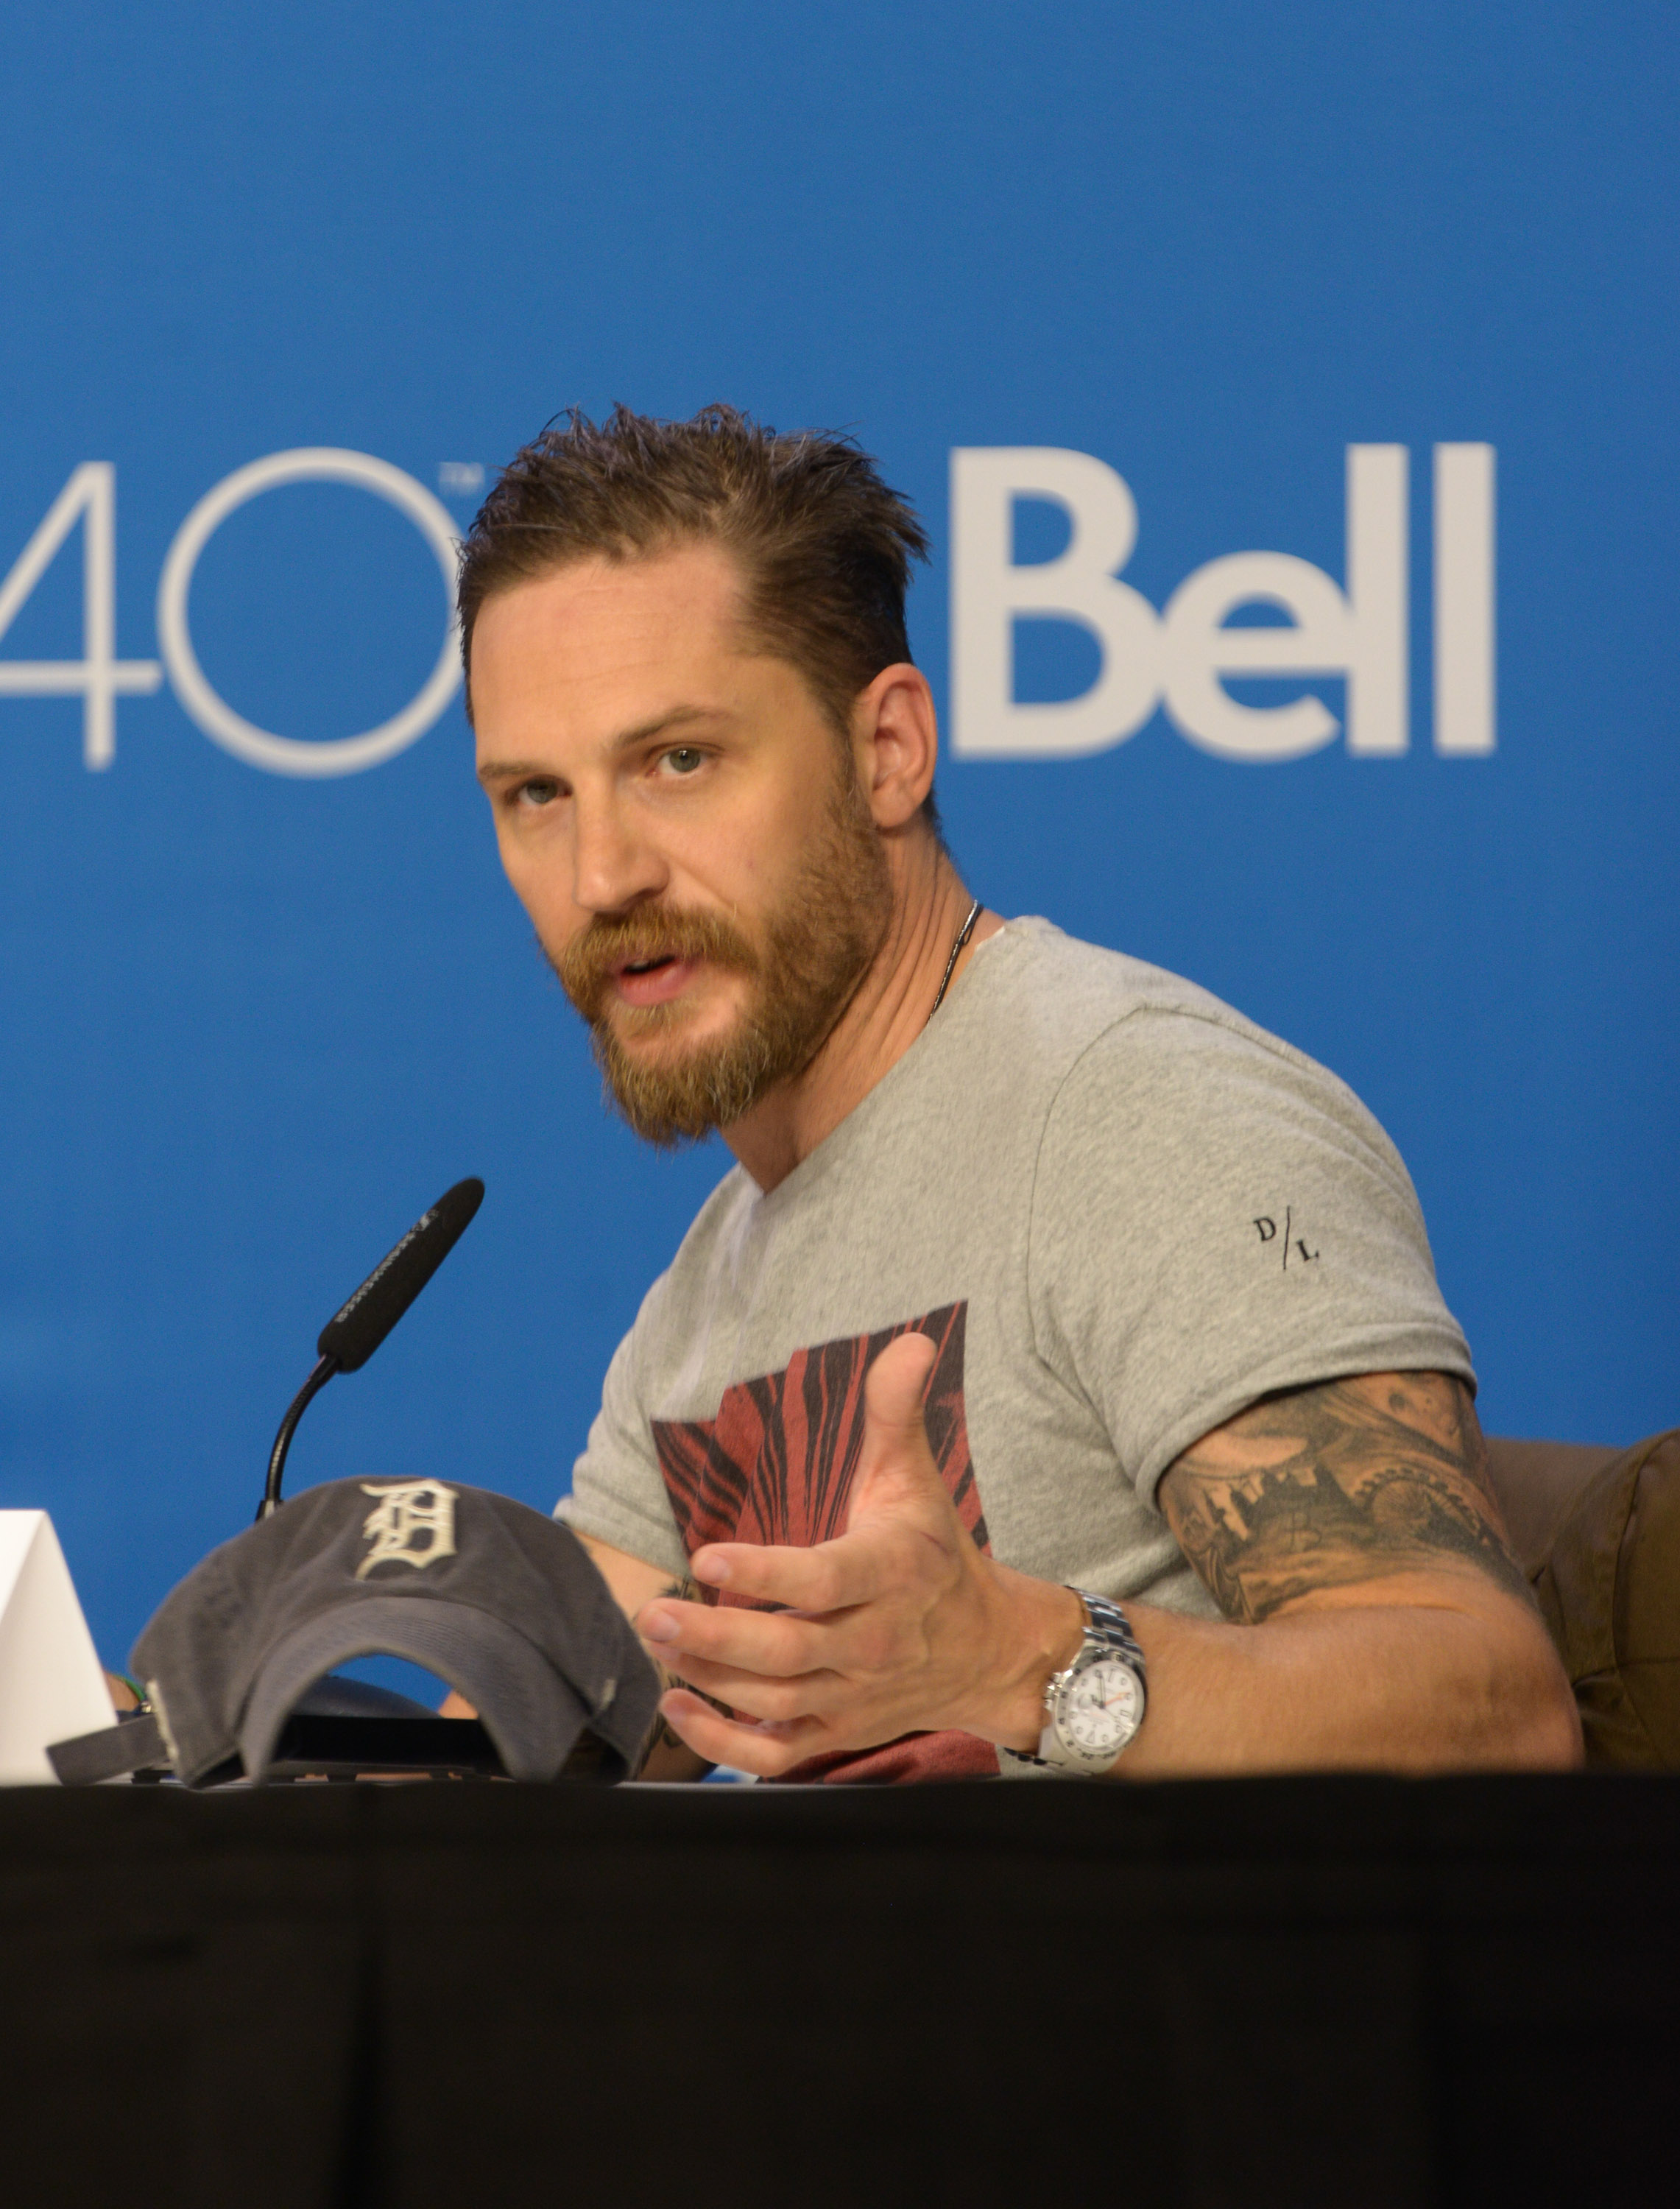 TORONTO, ON - SEPTEMBER 13:  Actor Tom Hardy speaks during the 'Legend' press conference  at TIFF Bell Lightbox on September 13, 2015 in Toronto, Canada.  (Photo by Juanito Aguil/WireImage)